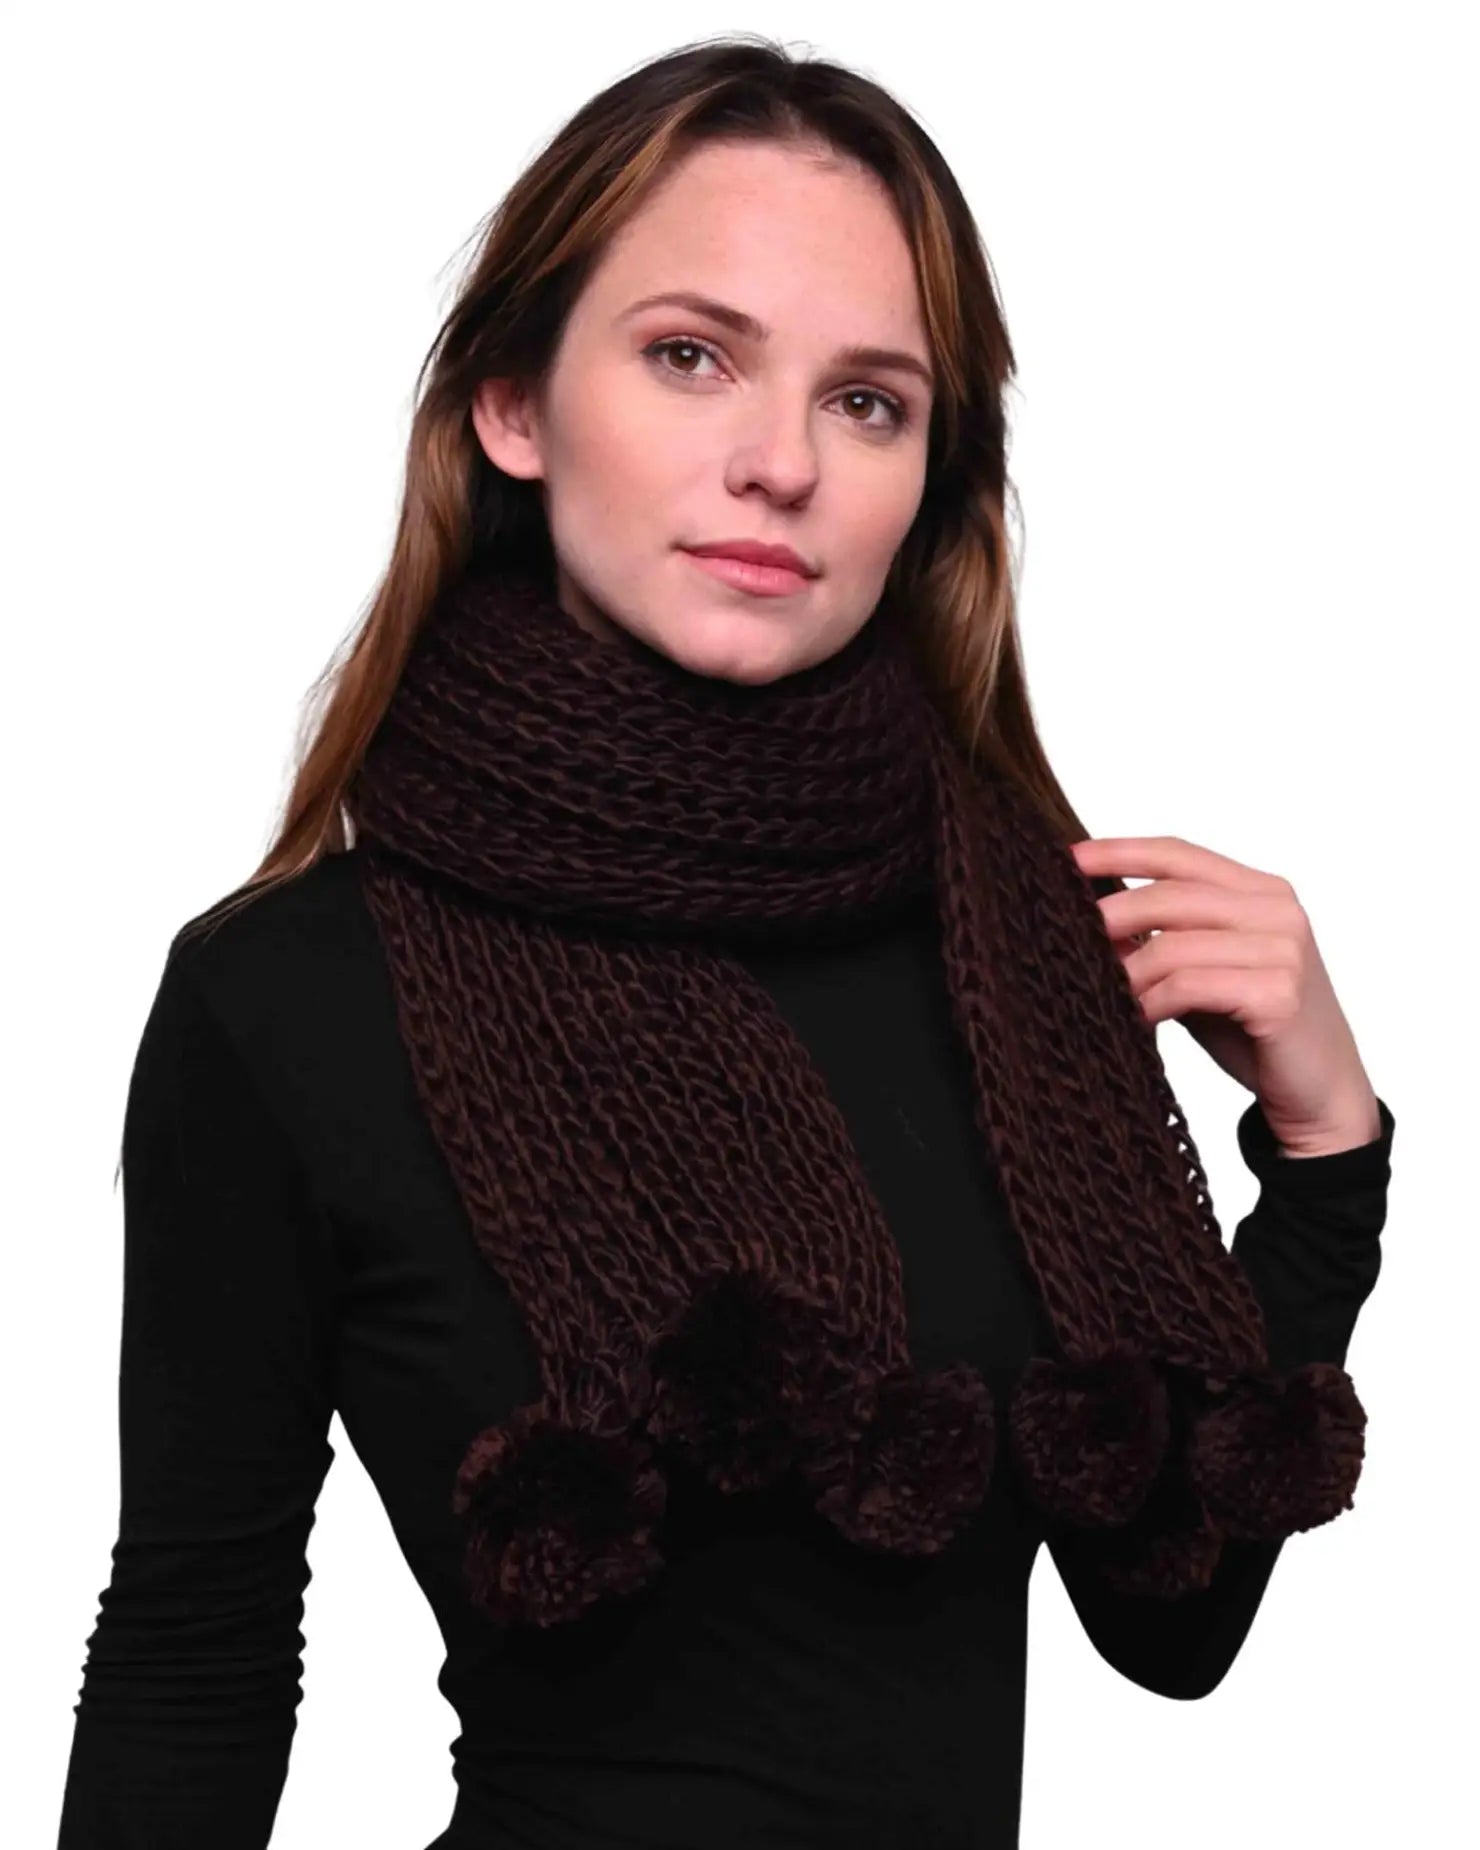 Chunky Knit Winter Scarf with Pom Pom Accents - Woman wearing brown scarf